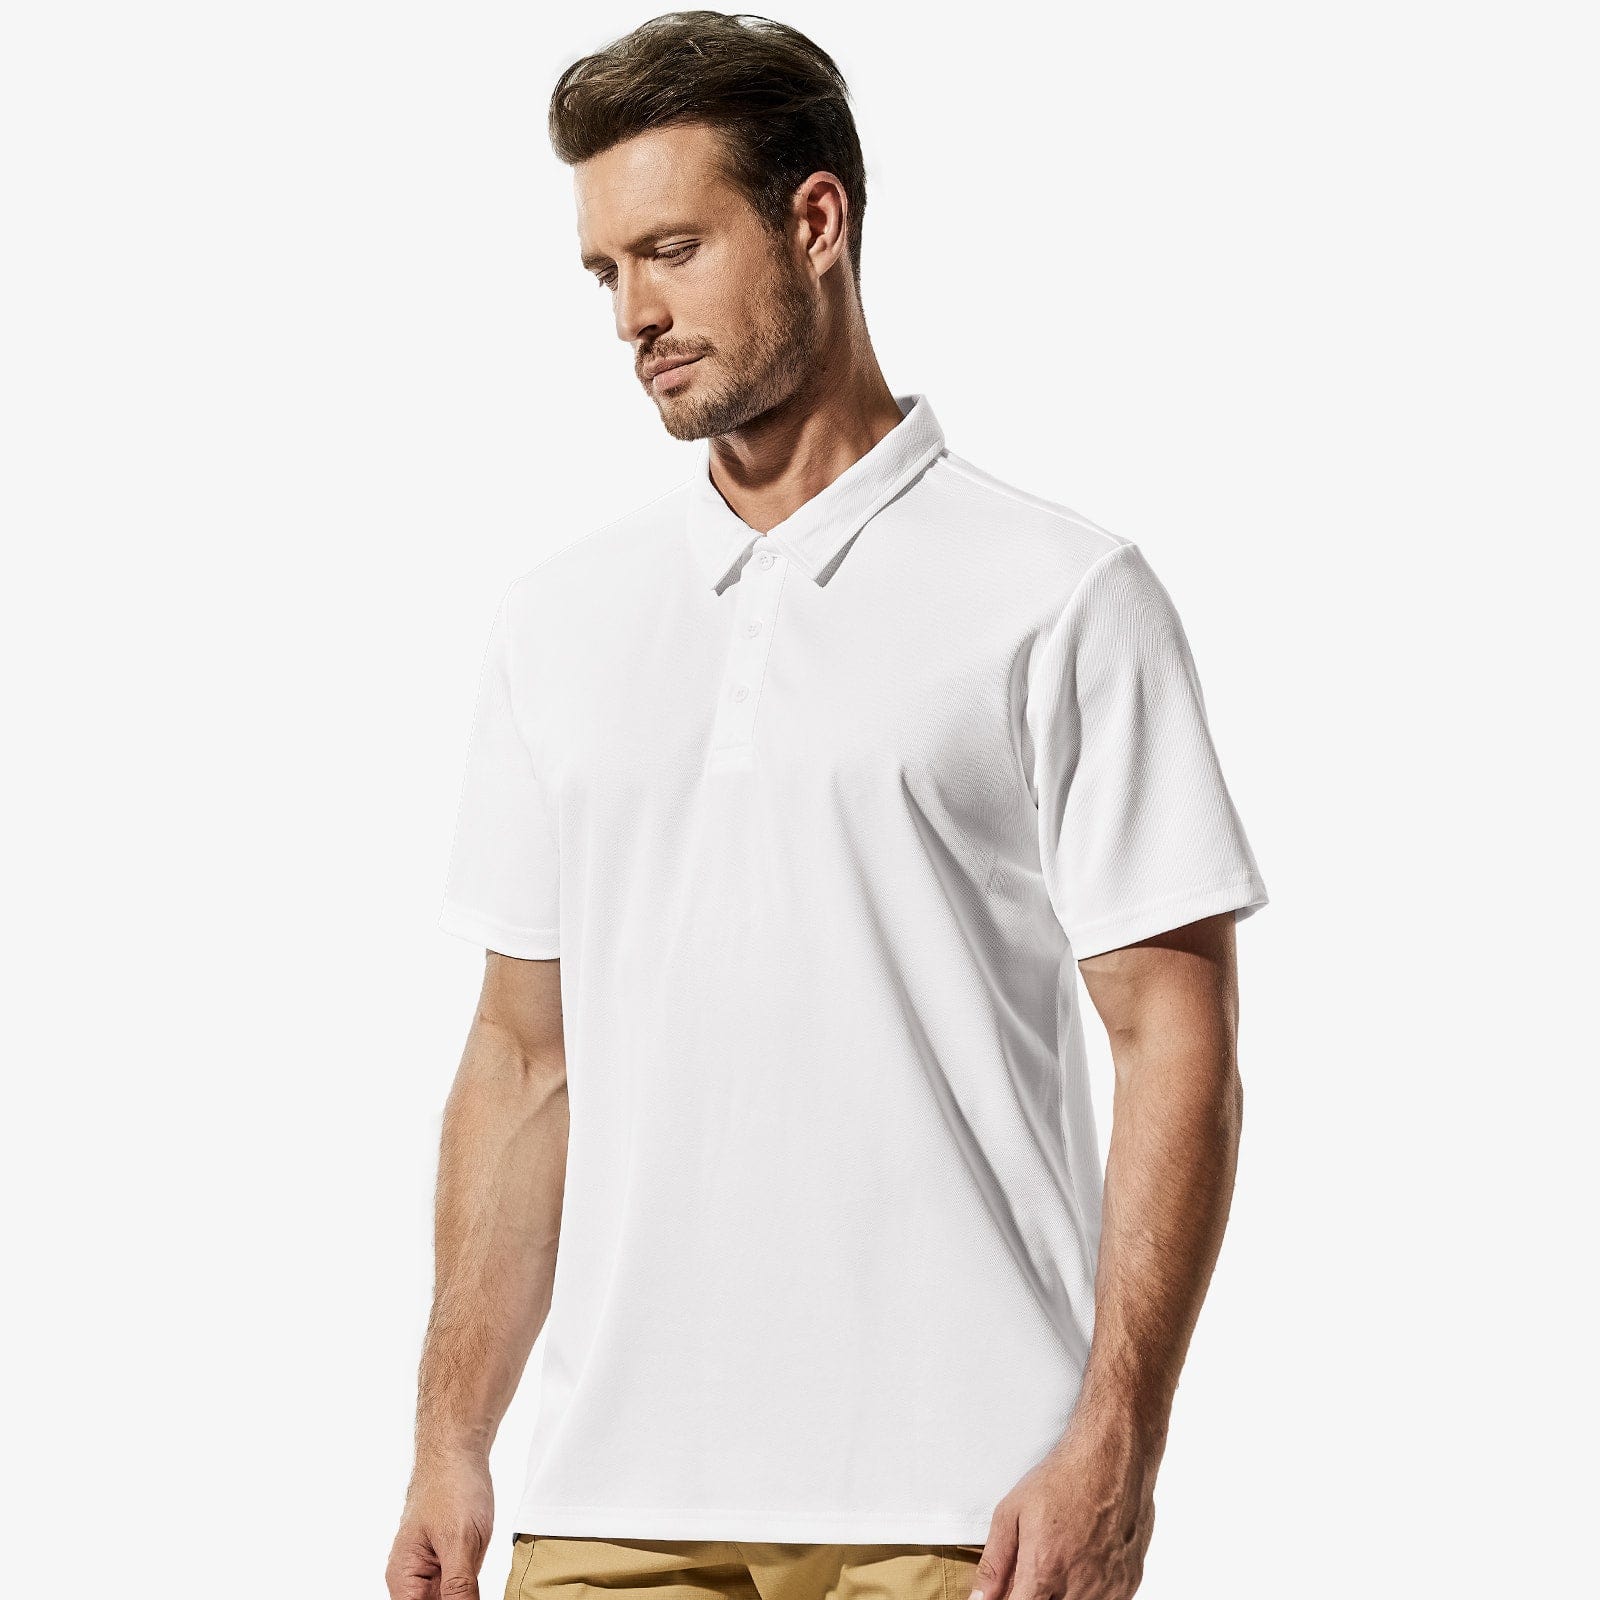 Collared Quick Men Casual Shirts Polo MIER Dry Shirts